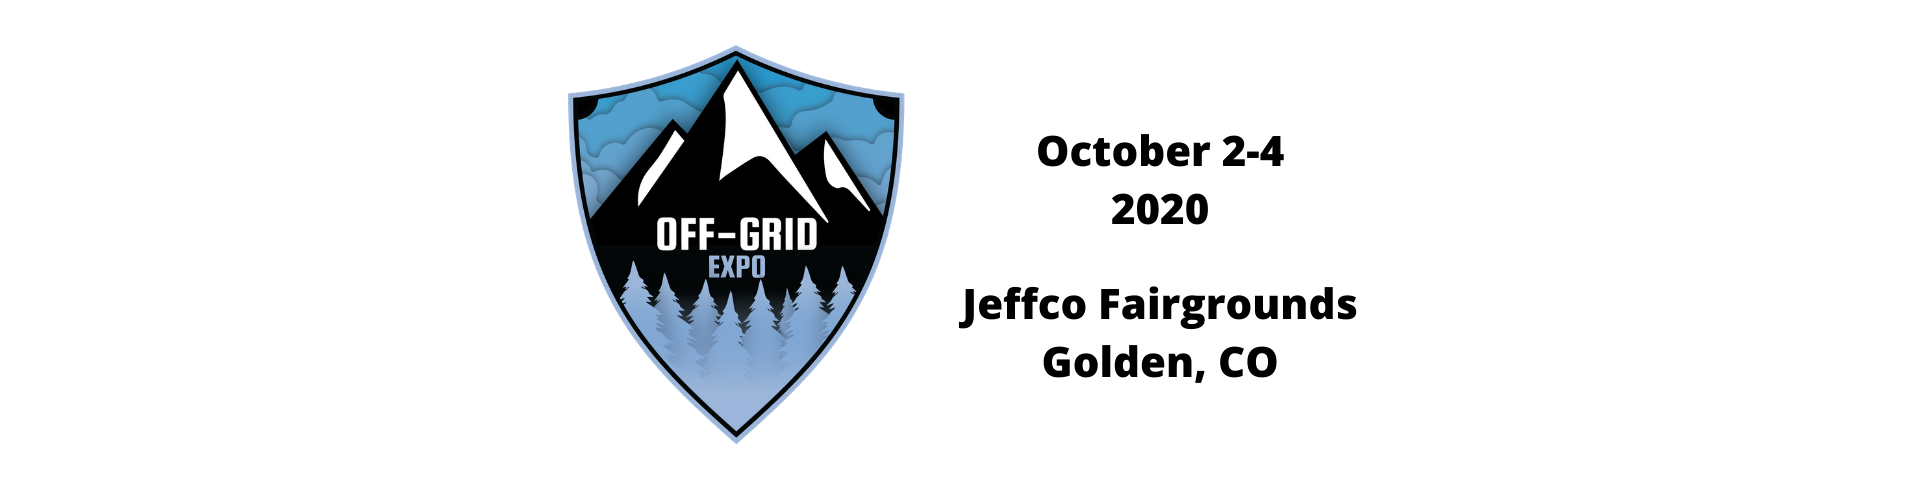 OffGrid Expo 2020 Browse Our Blog Boreas Campers